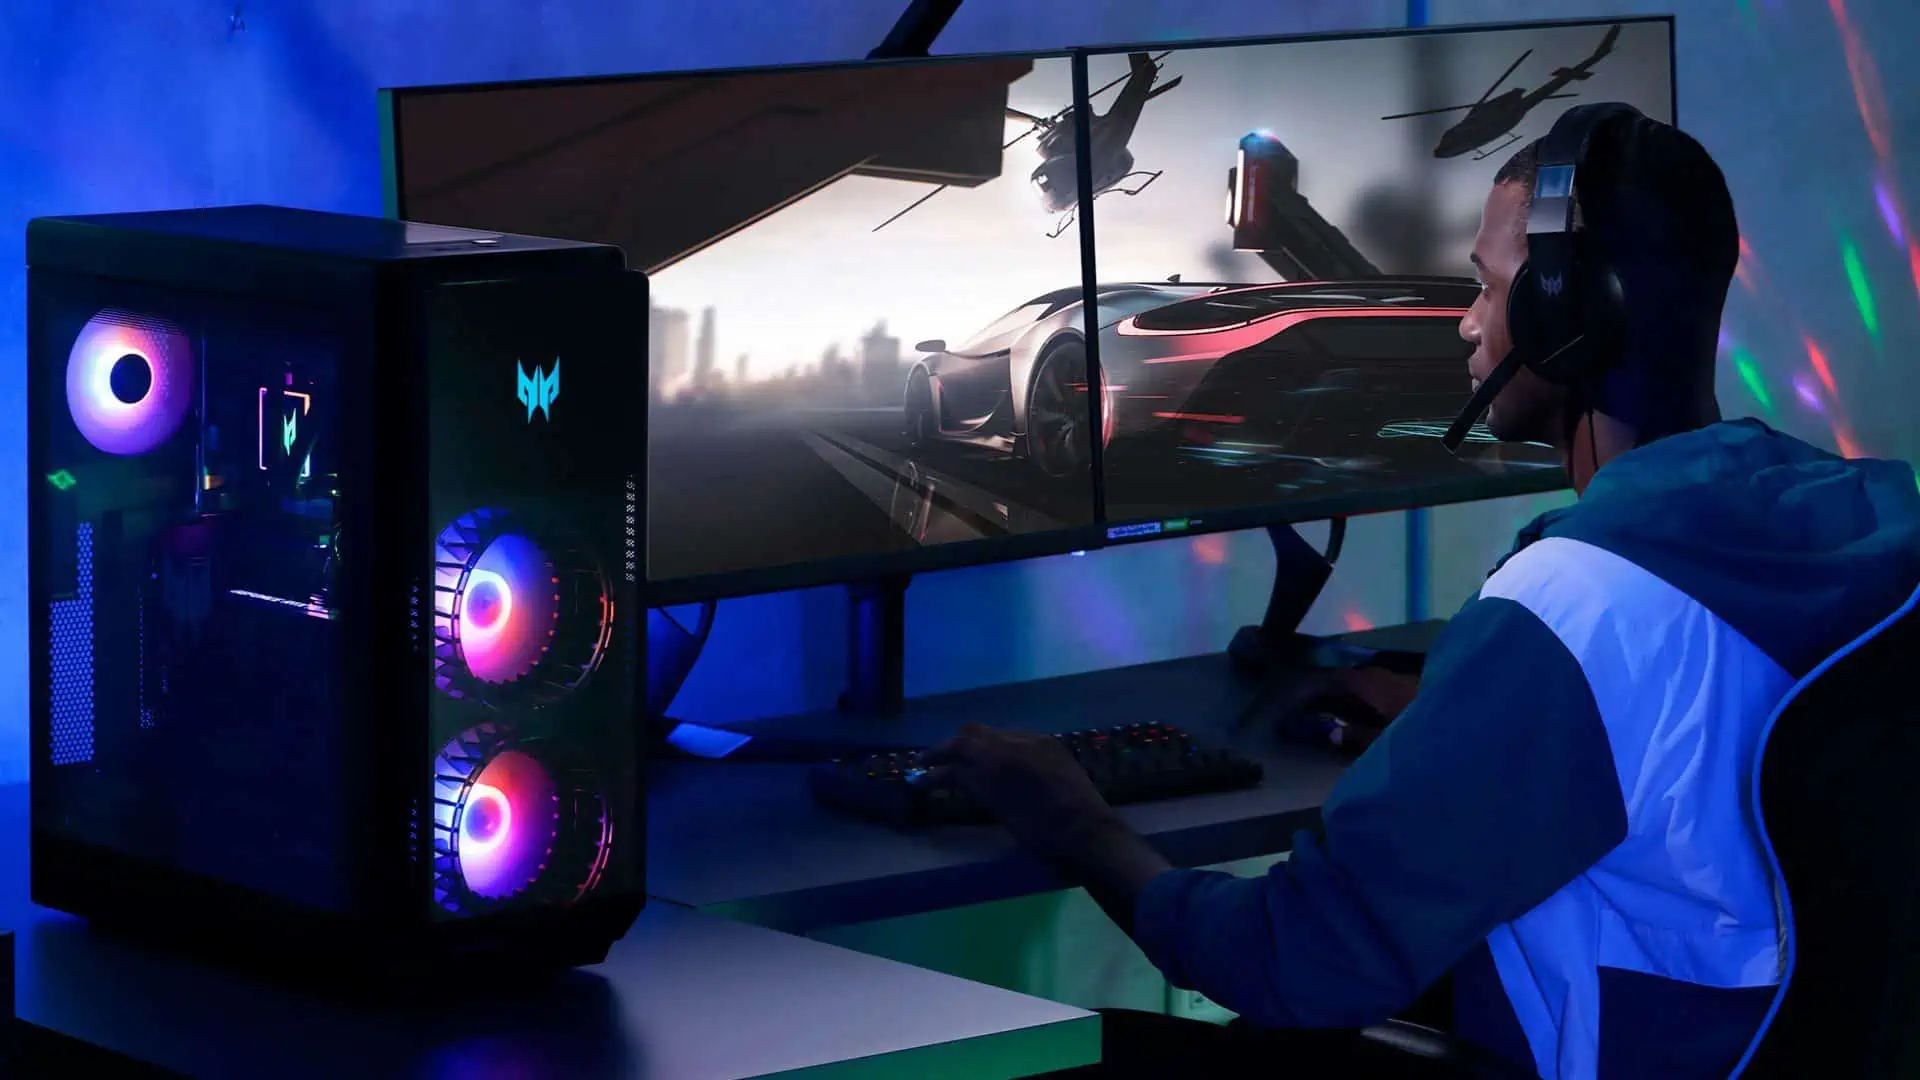 Gaming with Windows 11: What to Expect with the New PC Performance